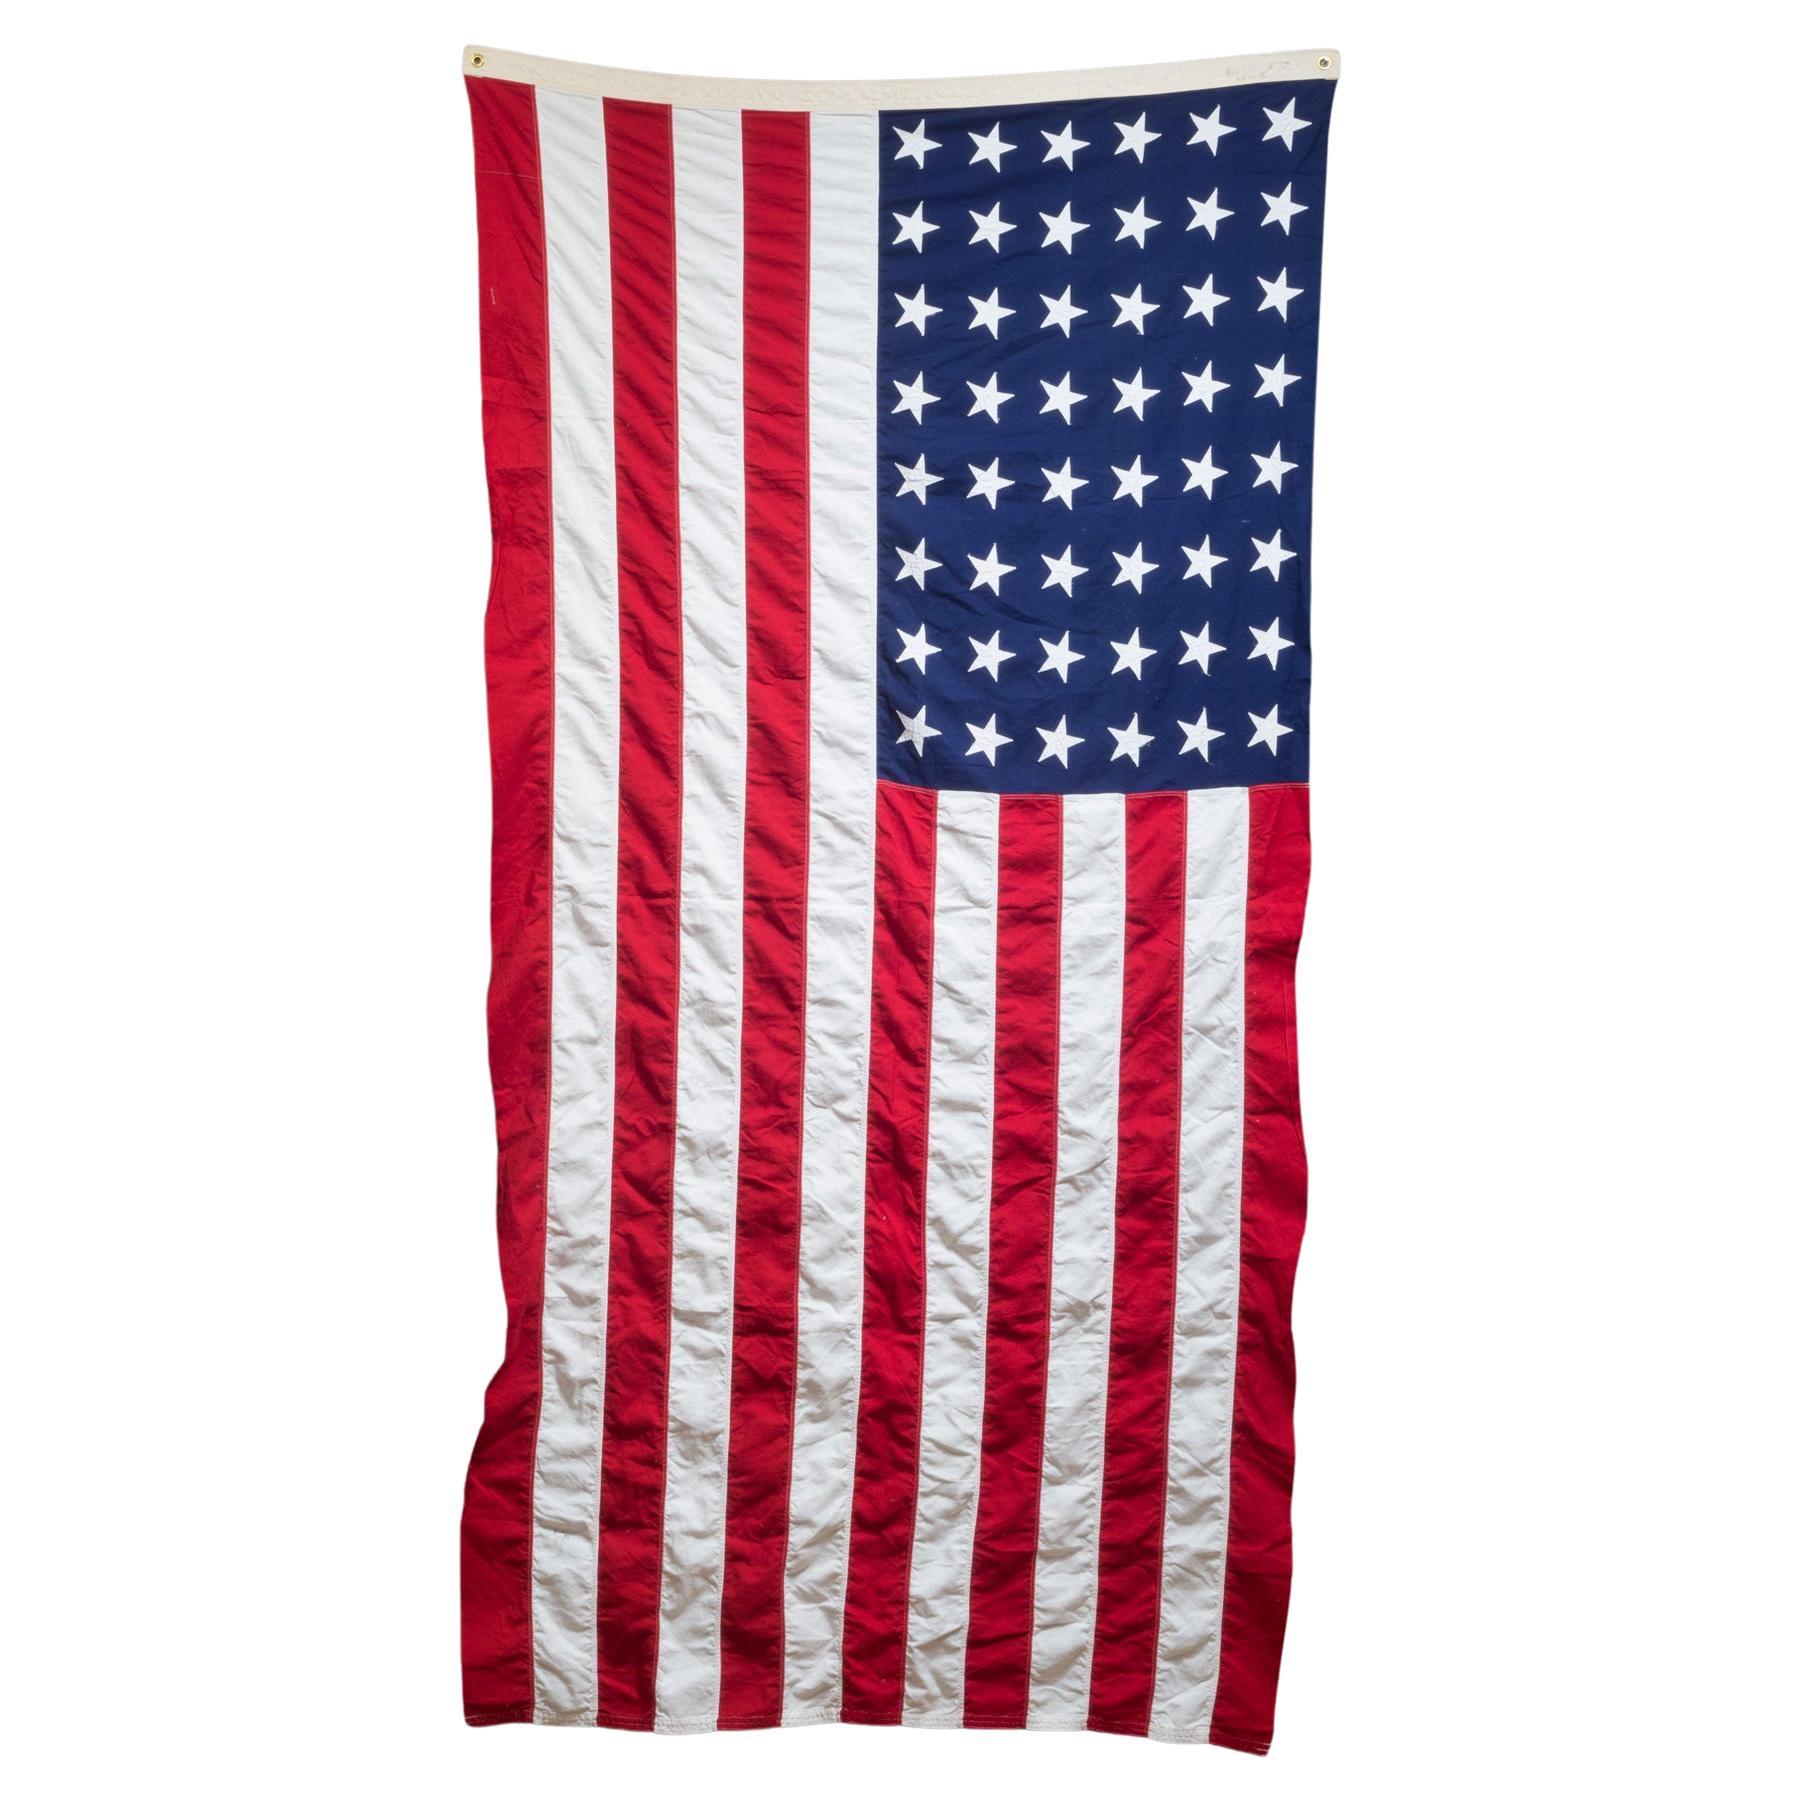 Early 20th C Monumental Wool American Flag With 48 Stars C 1940 1950 For Sale At 1stdibs